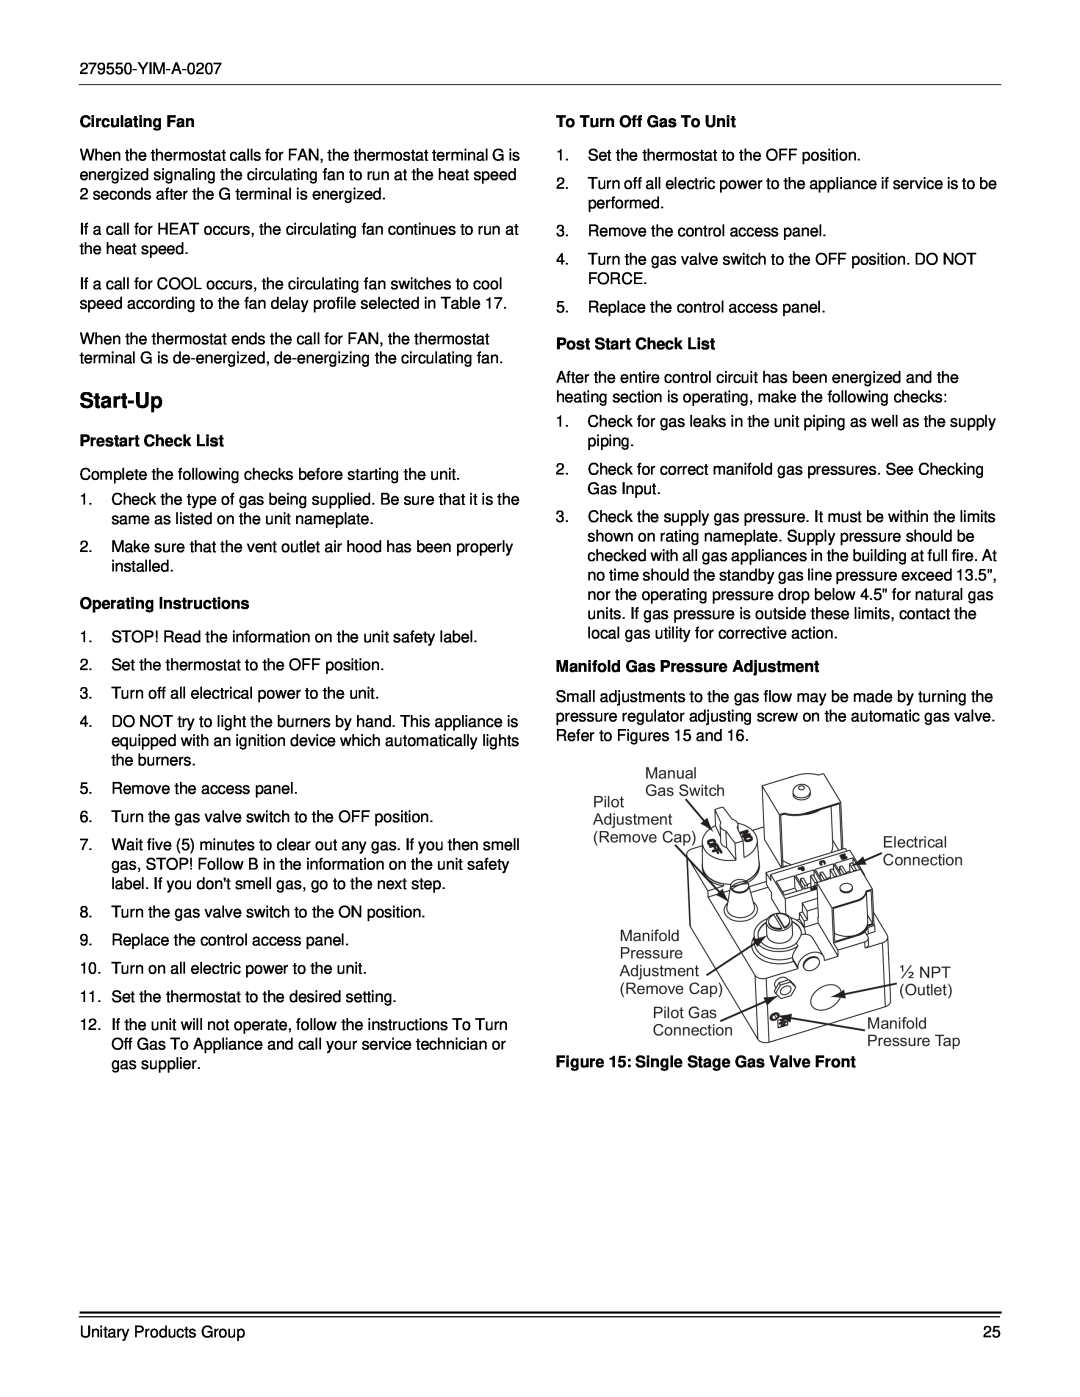 York R-410A dimensions Start-Up, Circulating Fan, Prestart Check List, Operating Instructions, To Turn Off Gas To Unit 